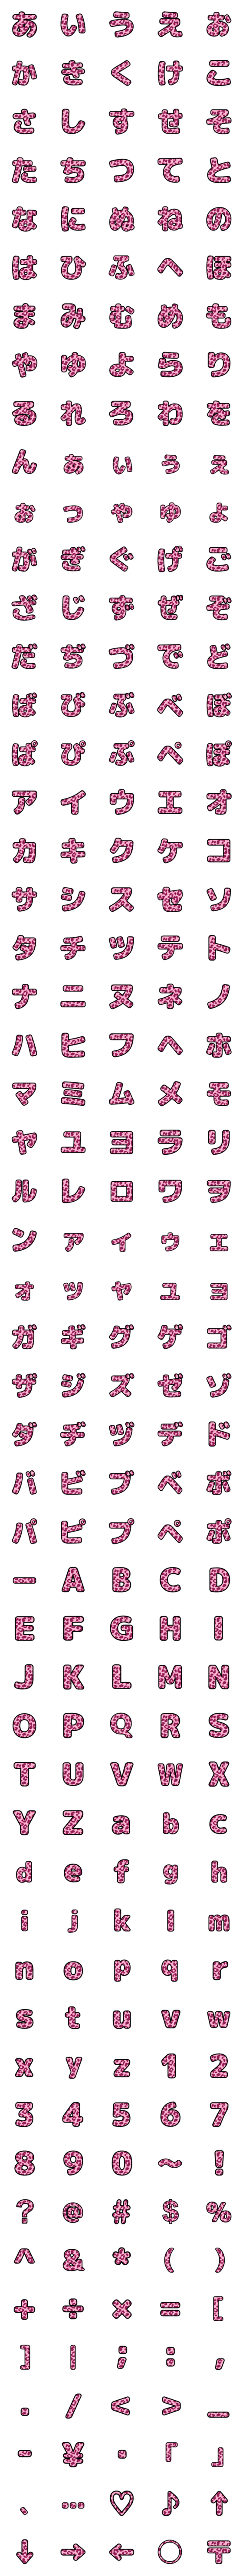 [LINE絵文字]ヒョウ柄 デコ文字★ピンク★の画像一覧